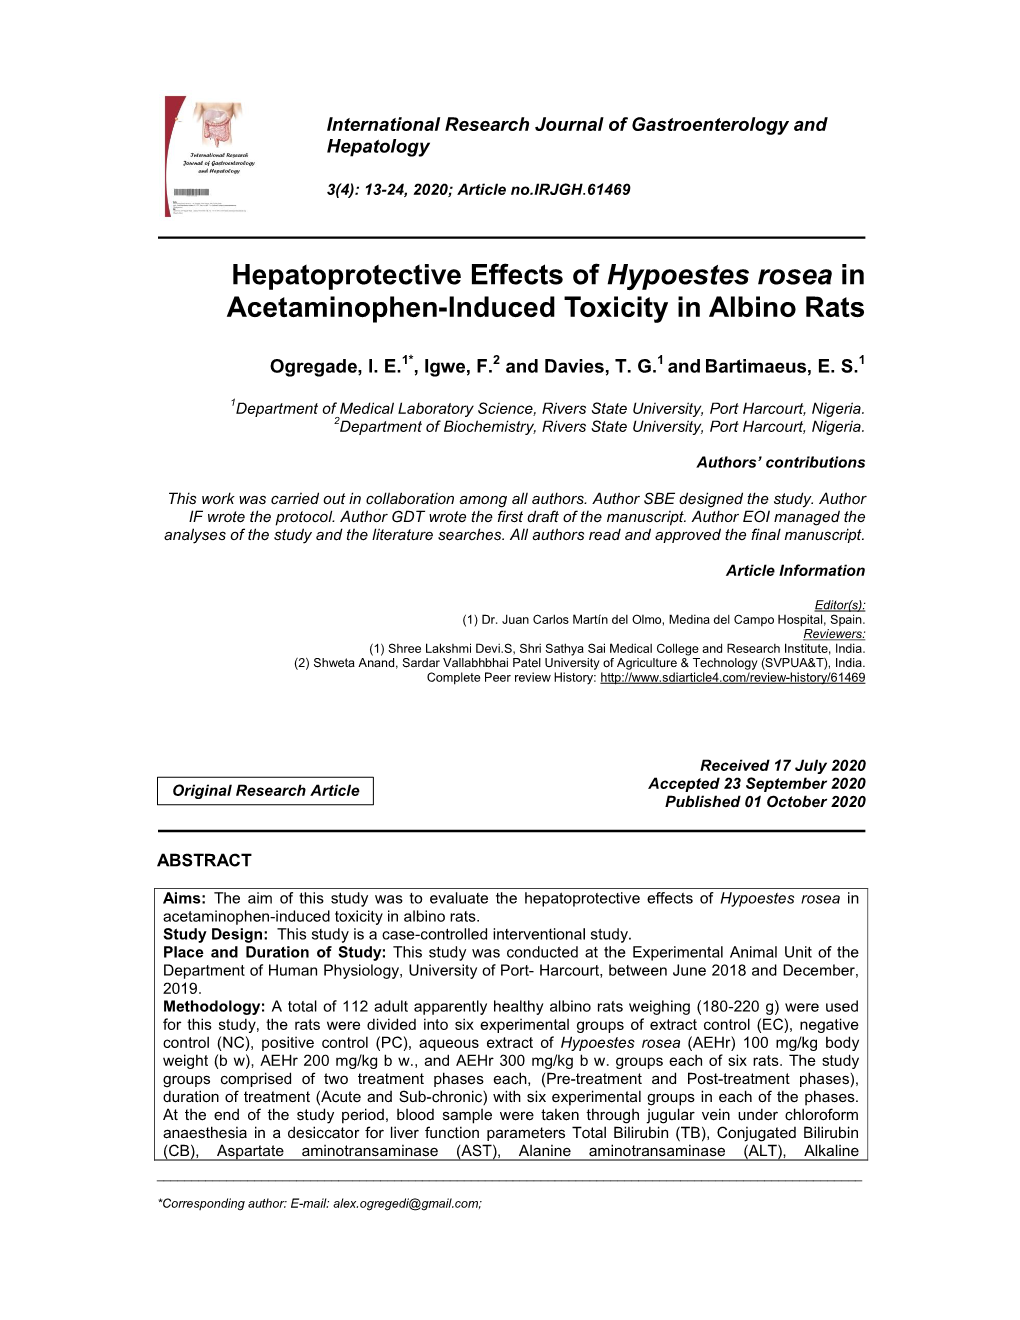 Hepatoprotective Effects of Hypoestes Rosea in Acetaminophen-Induced Toxicity in Albino Rats